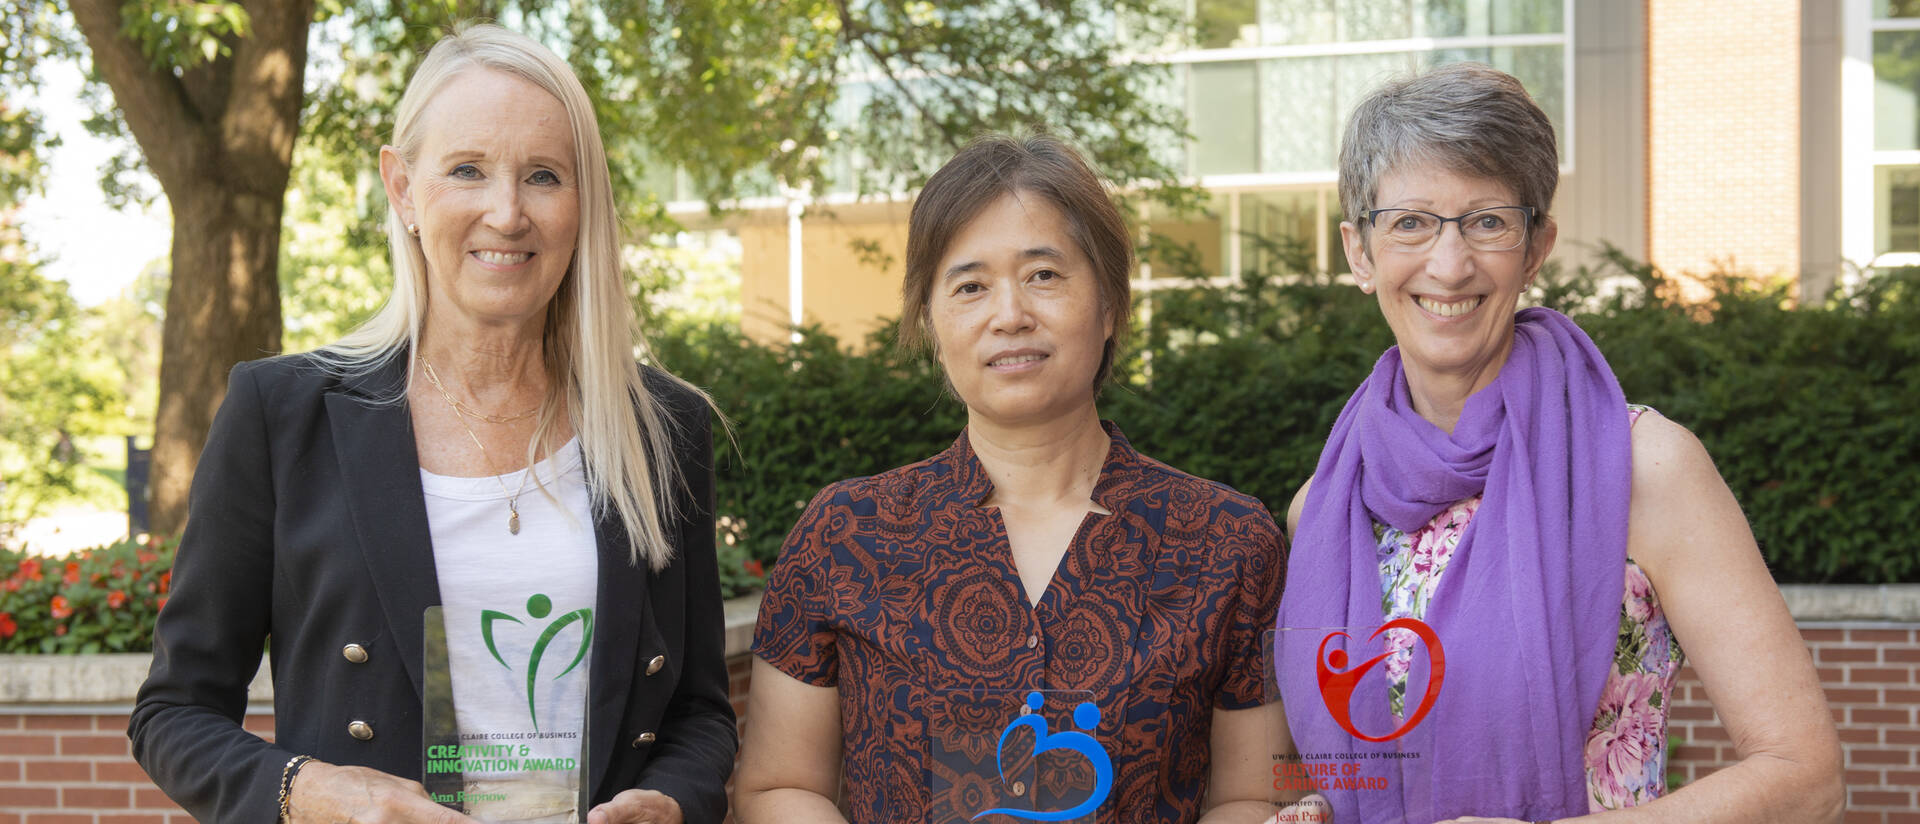 Ann Rupnow, Ling Liu, and Jean Pratt smile while holding awards received from the College of Business